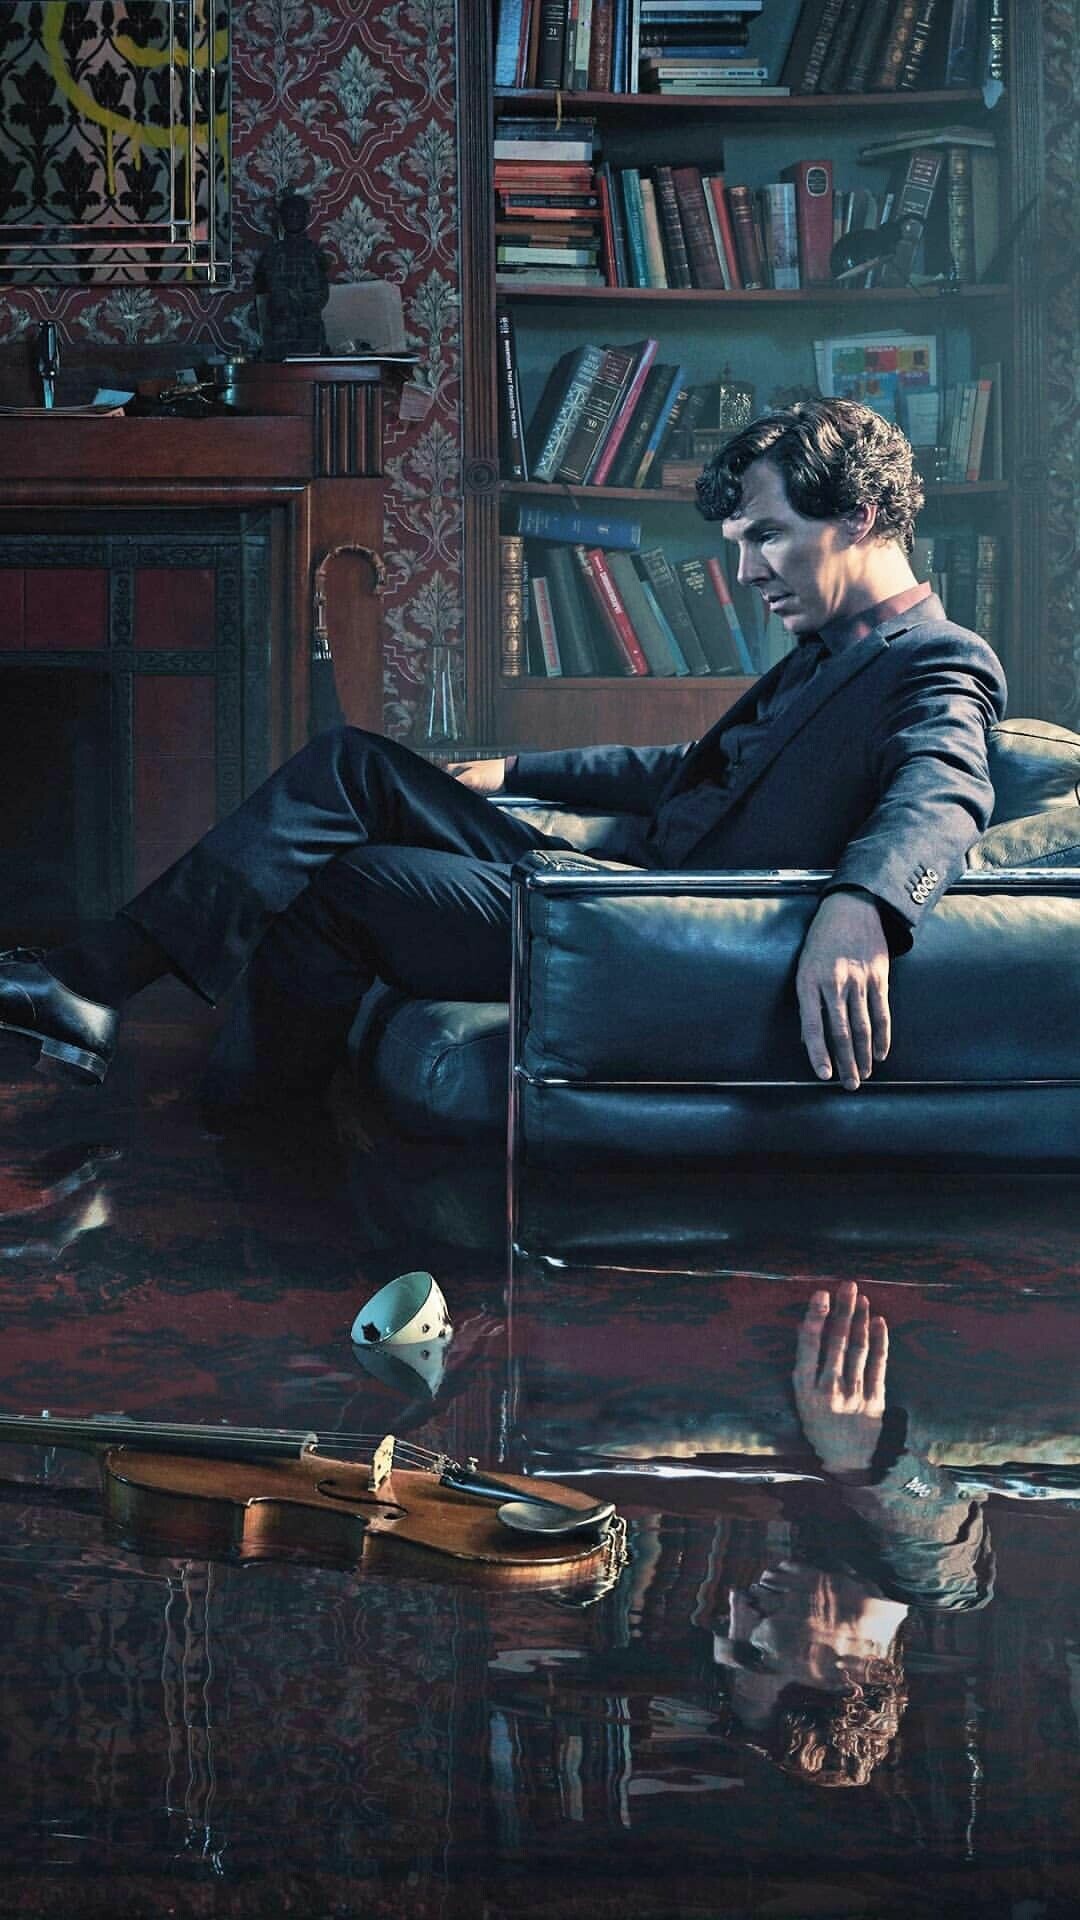 Sherlock (TV Series): Television series bringing the Great Detective to the present day and adapting his cases to the modern world. 1080x1920 Full HD Wallpaper.